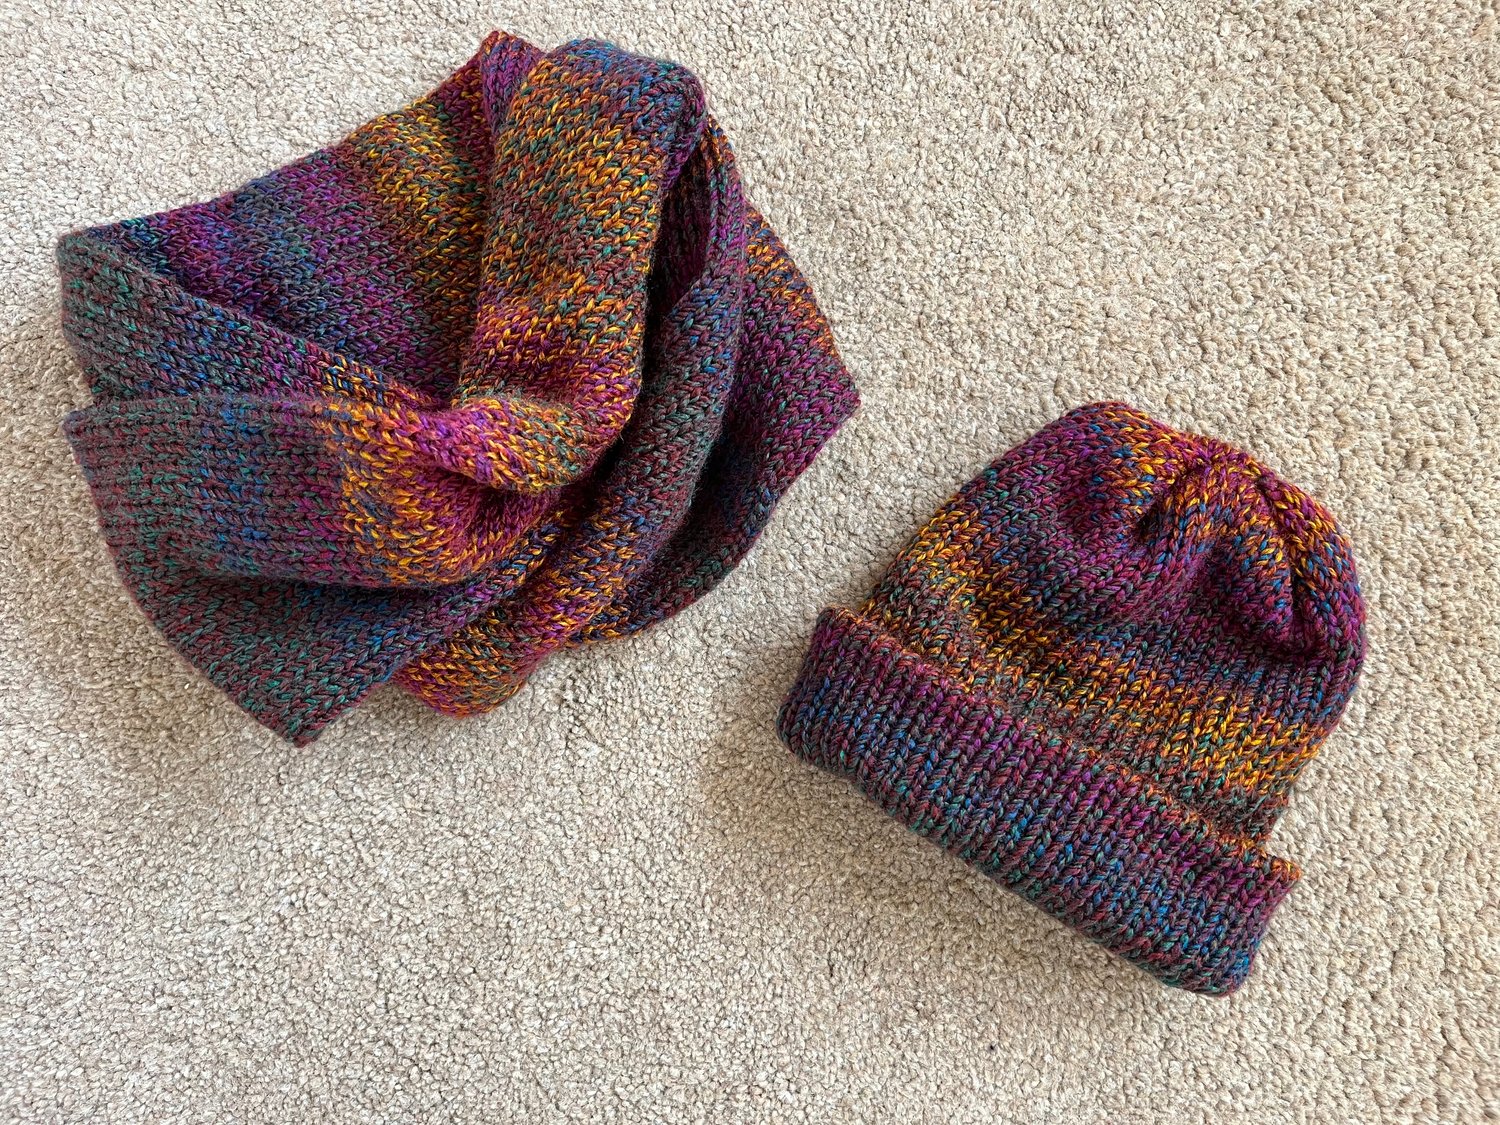 Image of All That Snazz Infinity Scarf